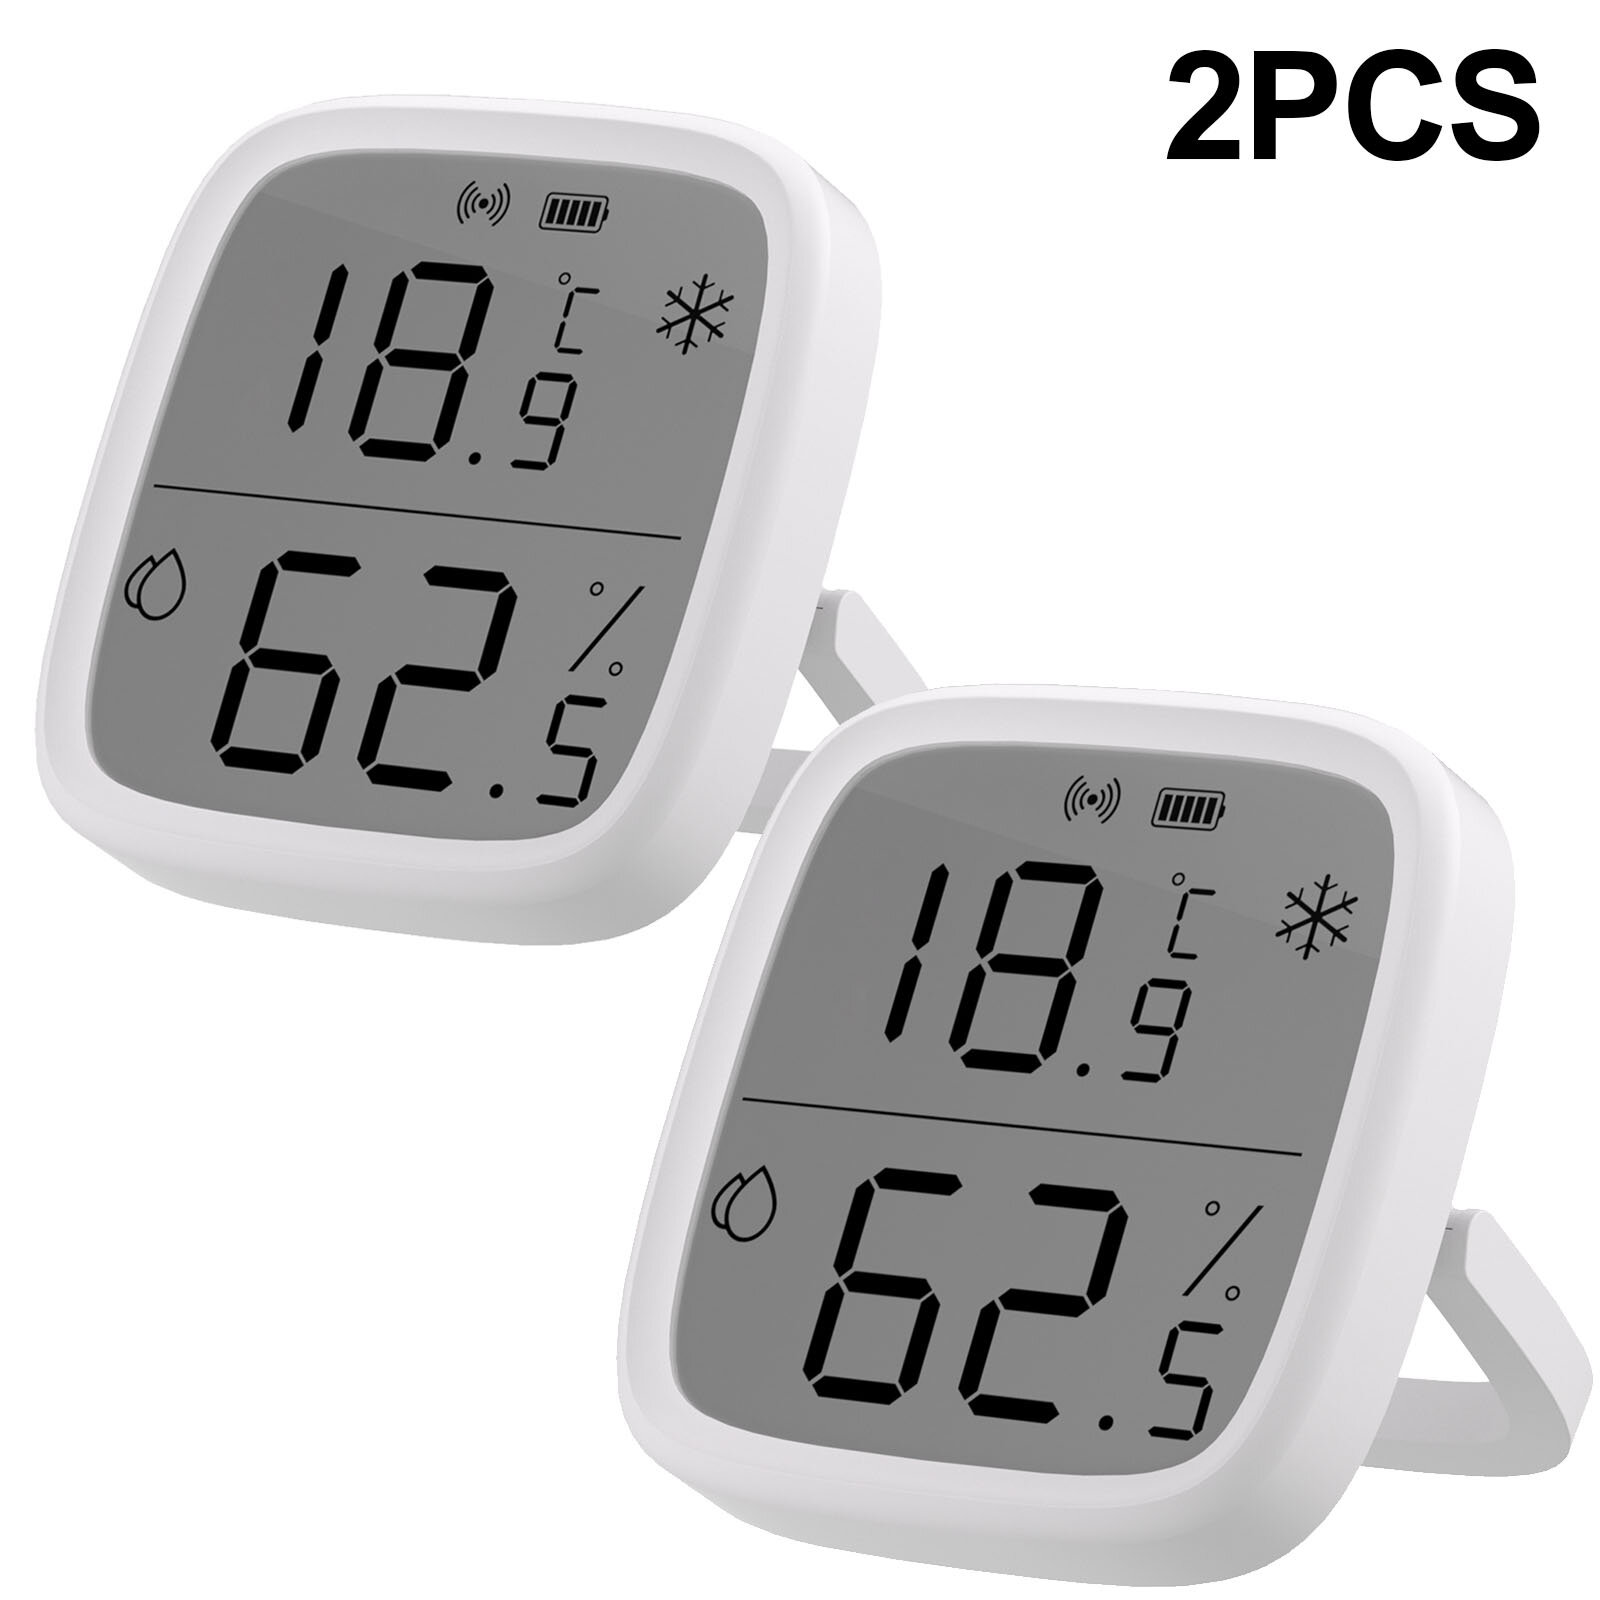 

2Pcs SONOFF SNZB-02D LCD Smart Temperature Humidity Sensor APP Real-time Monitoring Work with ZB Bridge-P/ ZB Dongle/ NS